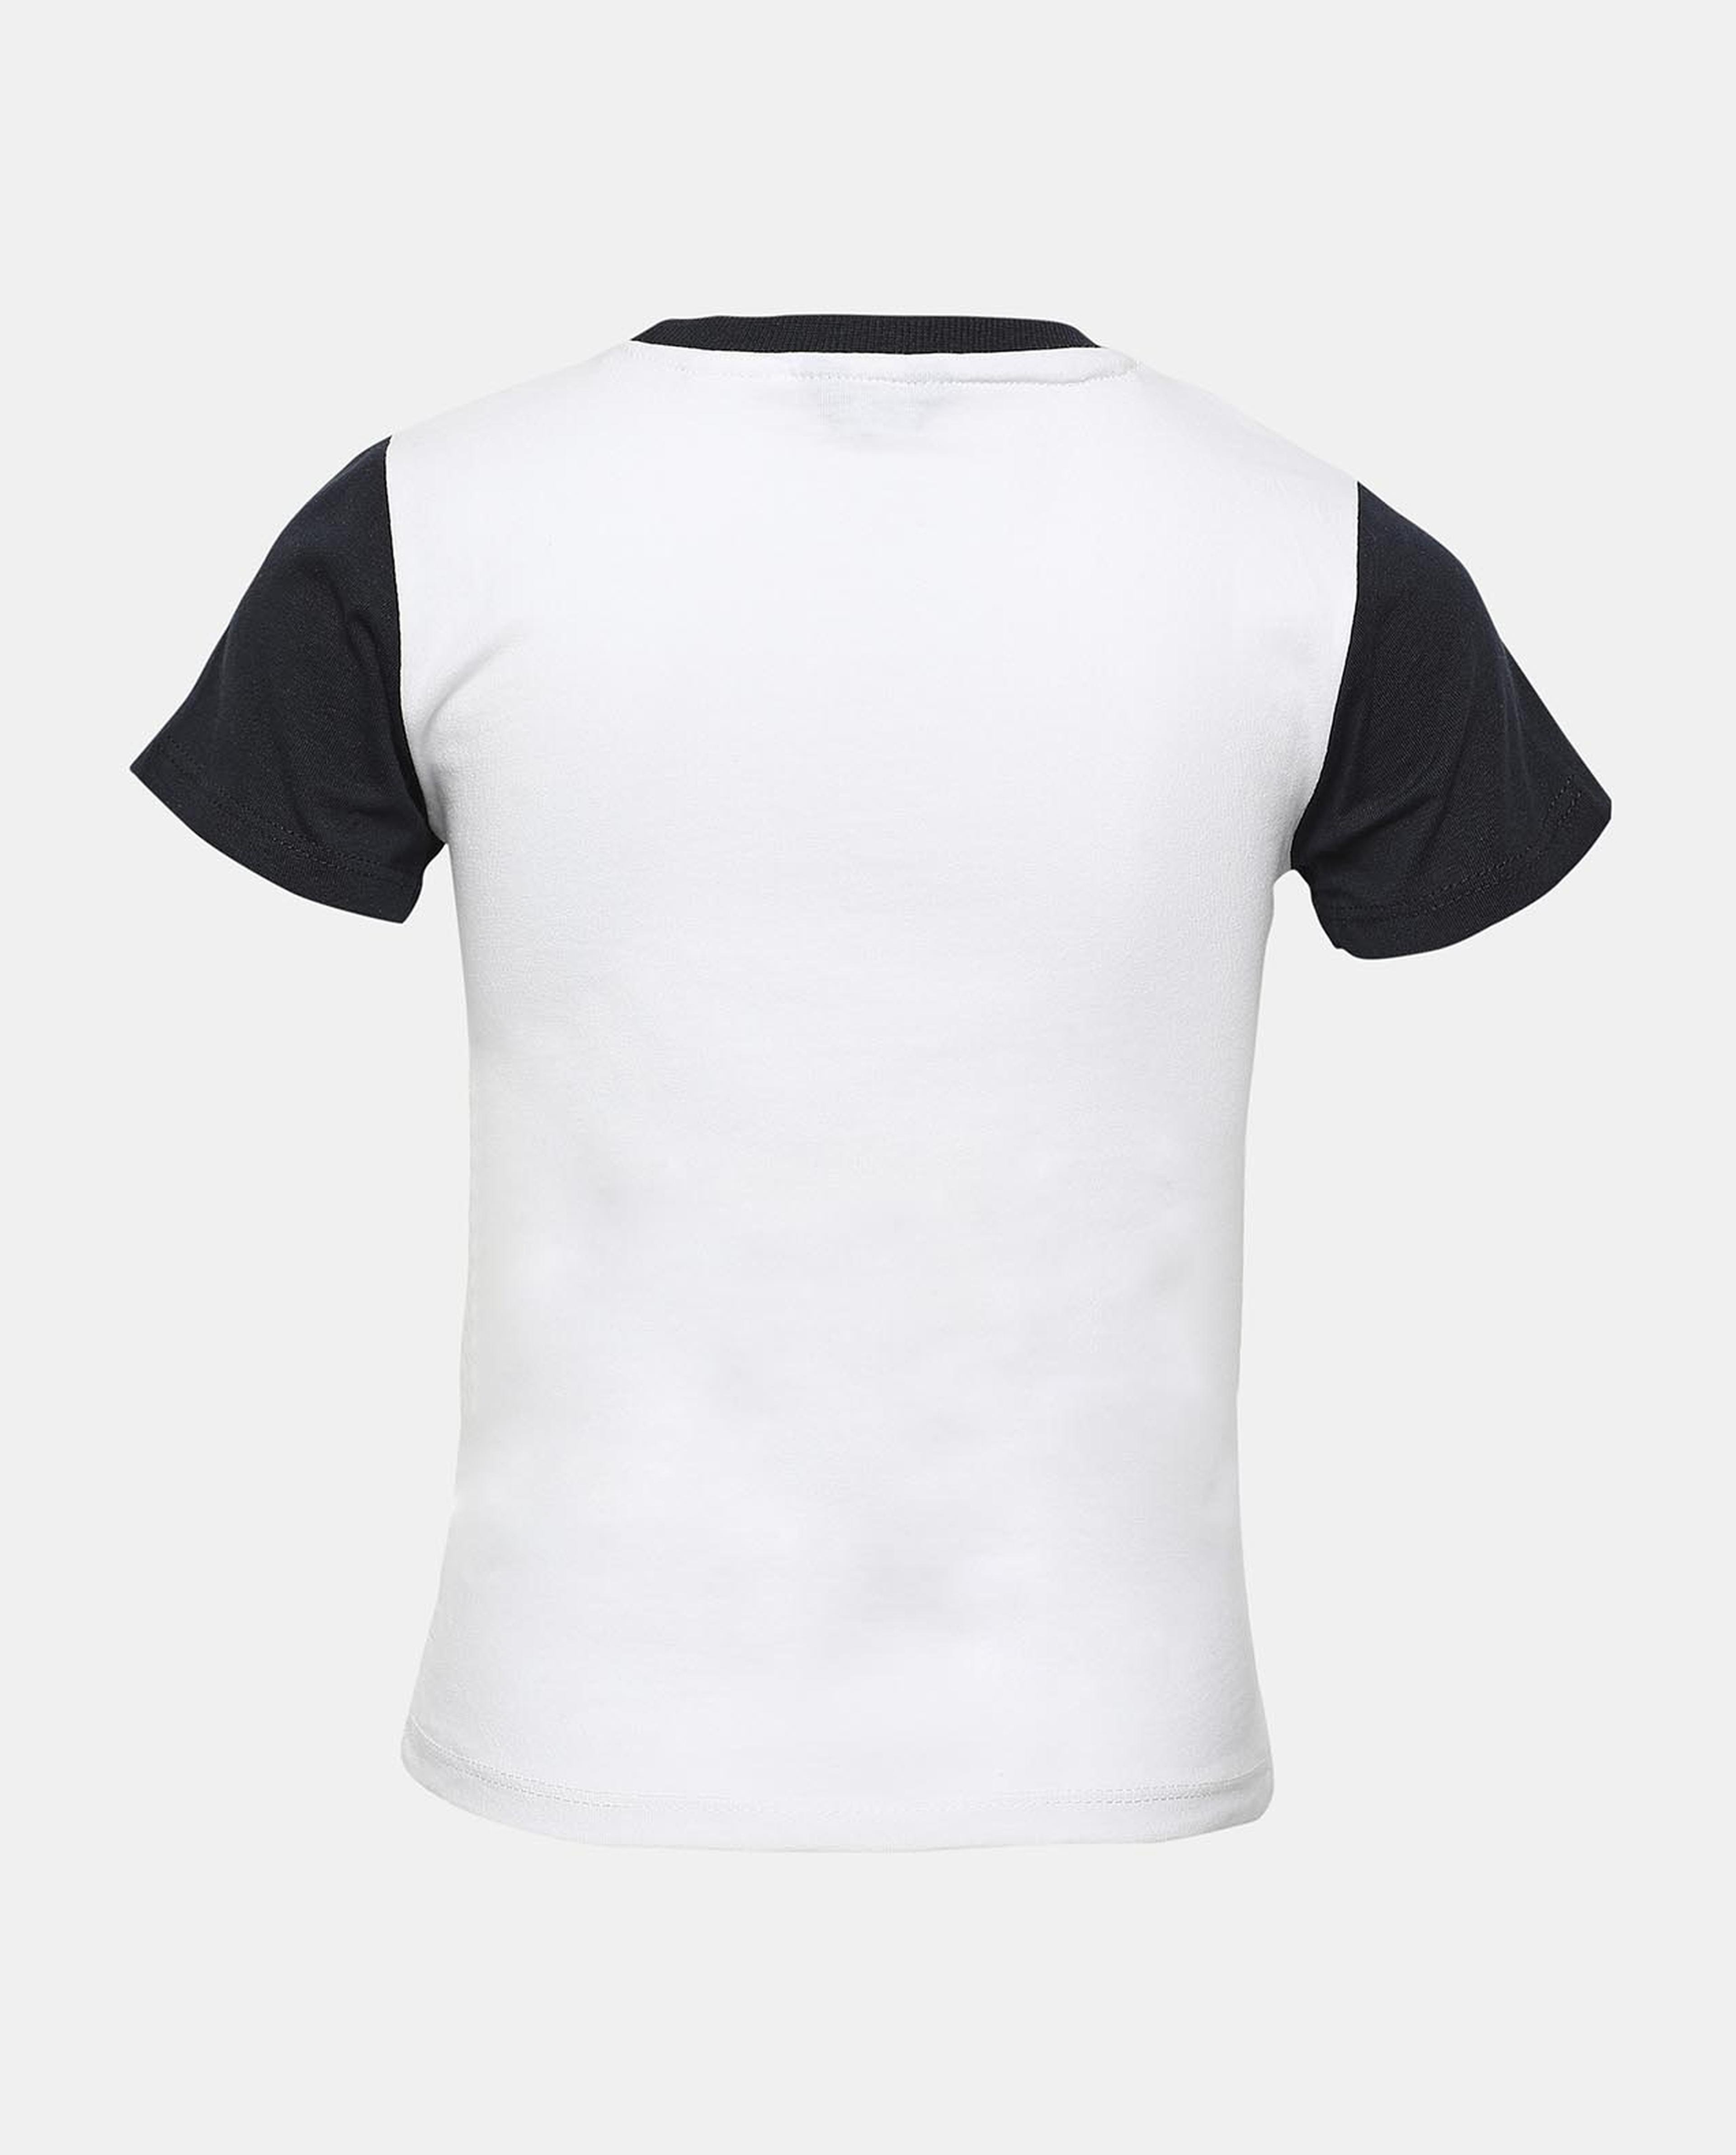 Printed T-Shirt with Polo Neck Short Sleeve